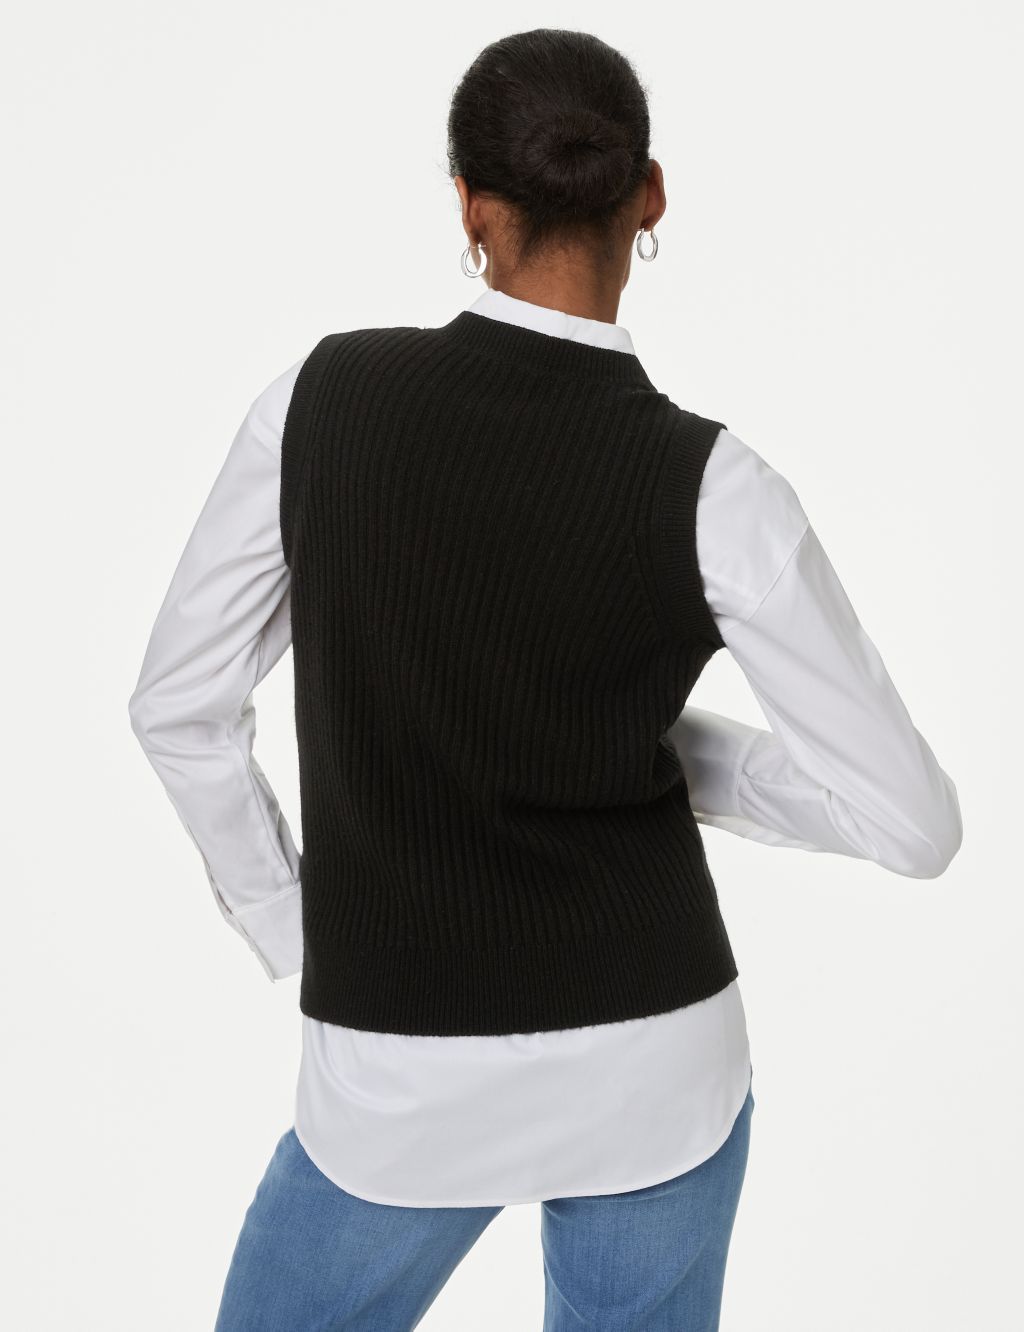 Merino Wool With Cashmere Knitted Vest image 5